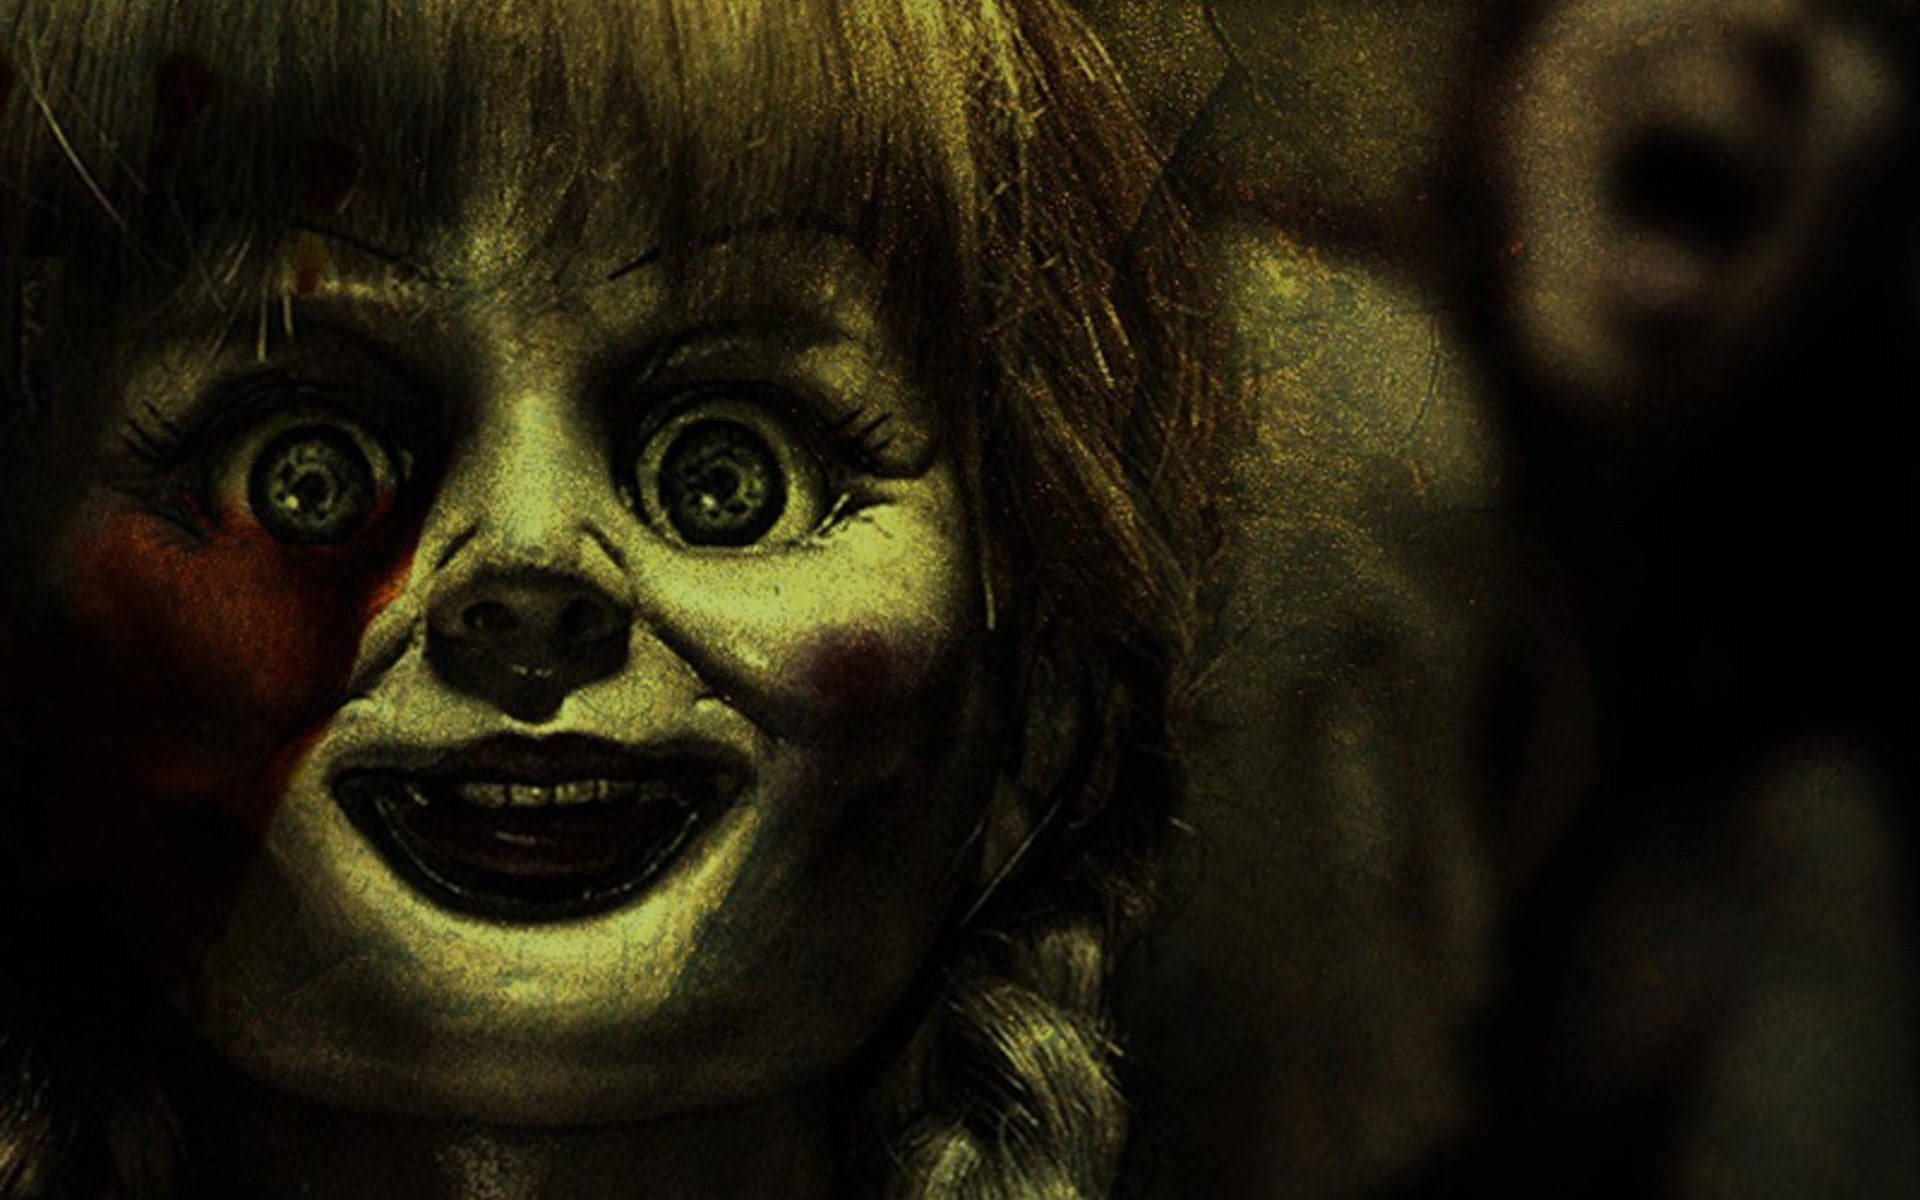 Closed-up Annabelle Doll Background